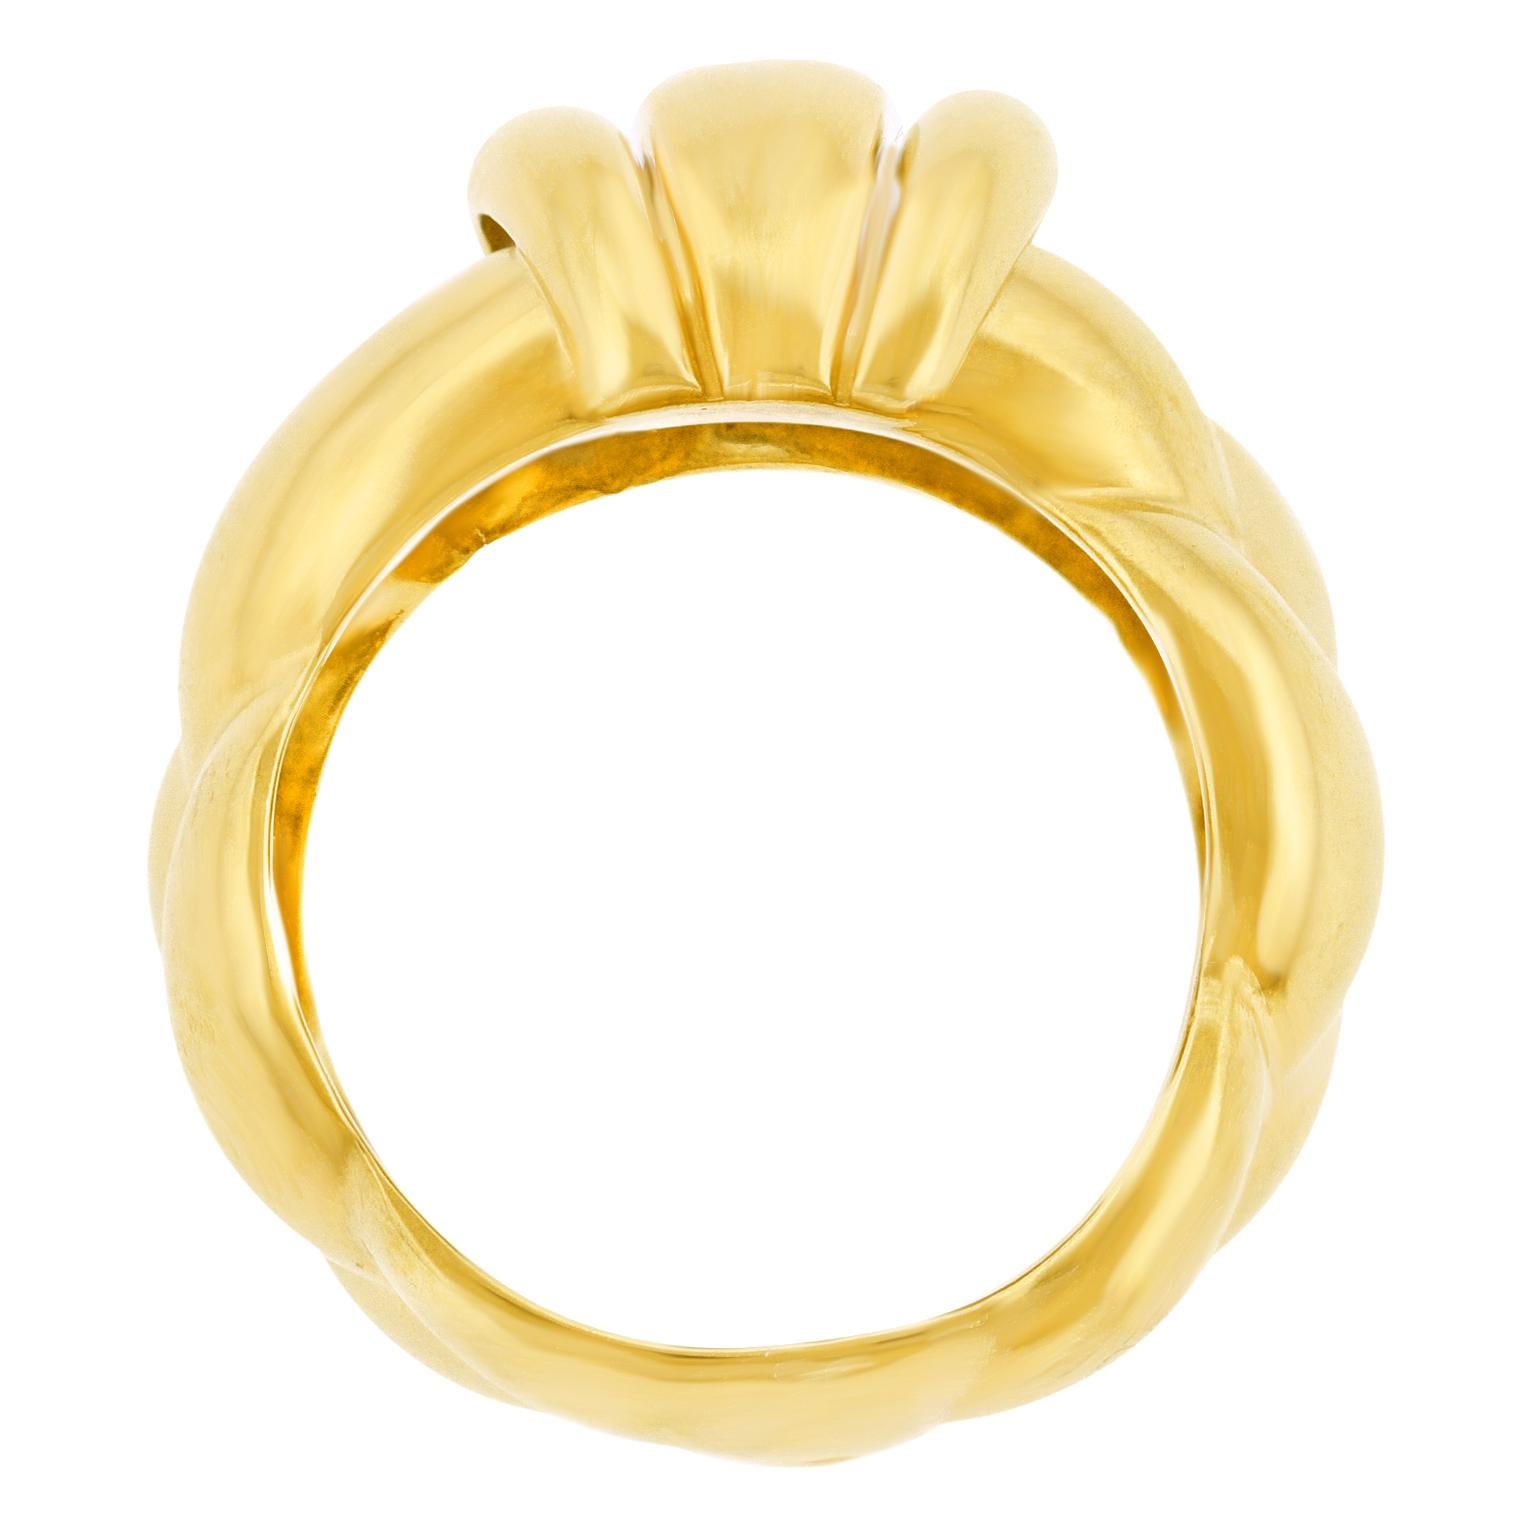 O.J. Perin Gold Ring 18k France For Sale 4